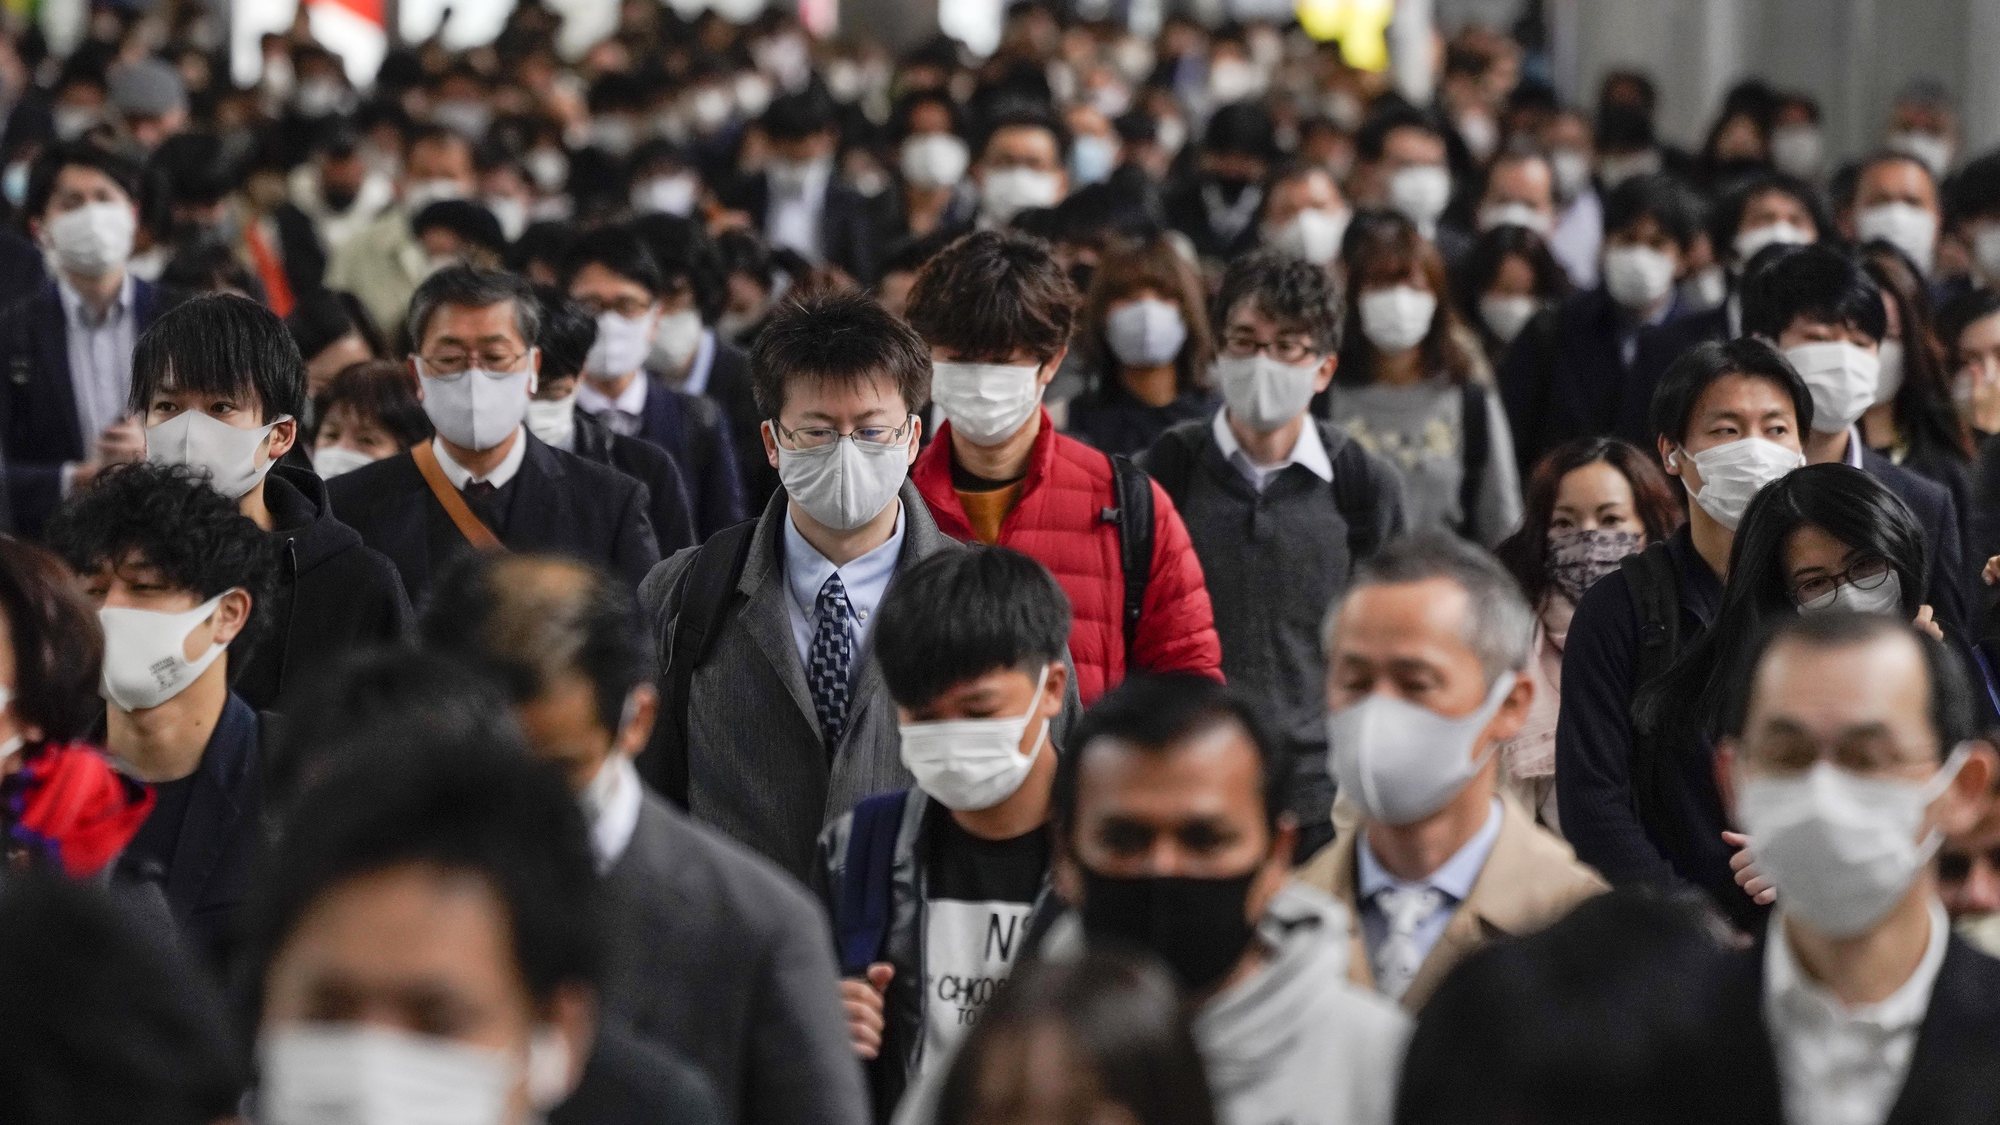 epa08897237 (FILE) - (FILE) Commuters walk to work after exiting from their packed commuter trains at Shinagawa railway station in Tokyo, Japan, 24 November 2020 (reissued 21 December 2020). According to latest media reports, the total number of coronavirus disease (COVID-19) infections in Japan has exceeded the 200,000 mark since the start of the pandemic.  EPA/KIMIMASA MAYAMA